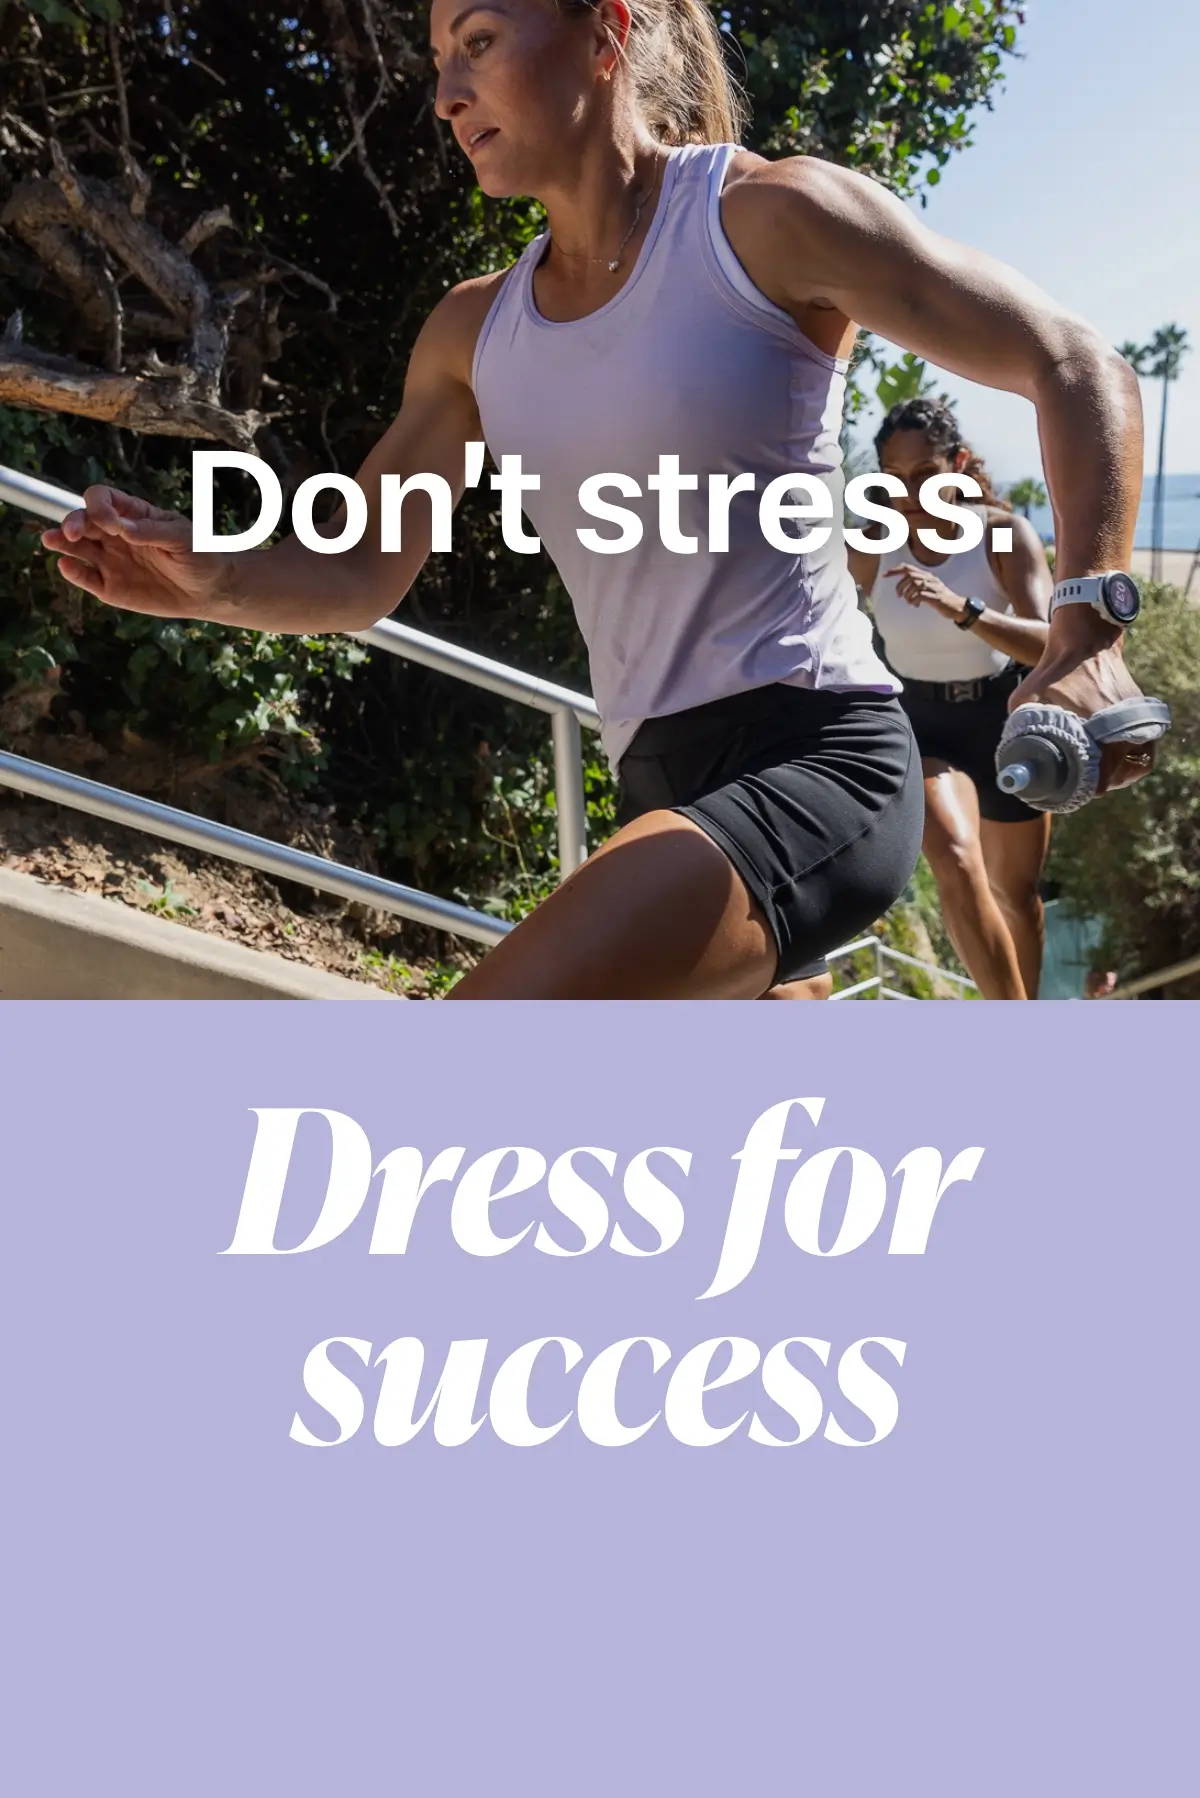 female runner with handheld water bottle with the words Don't Stress; beneath says Dress for success